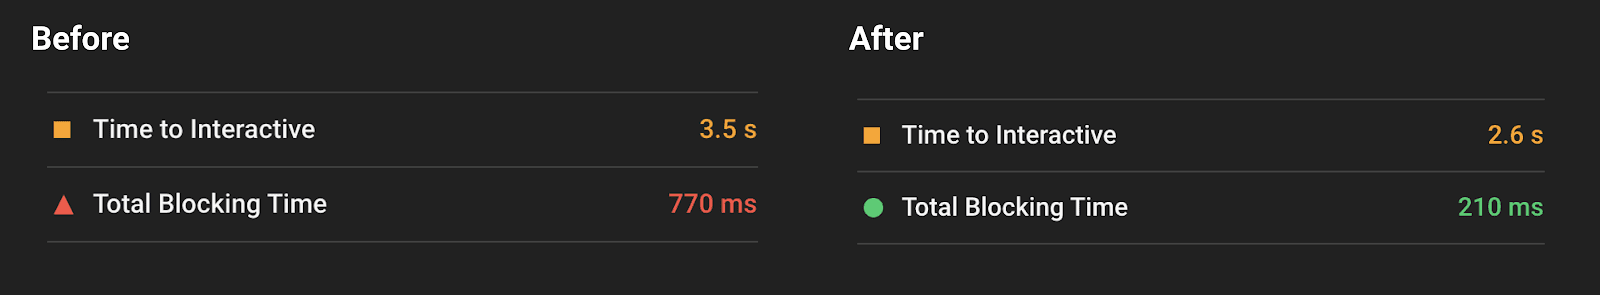 Improvements in TBT score in Lighthouse after optimizing the first-party script.